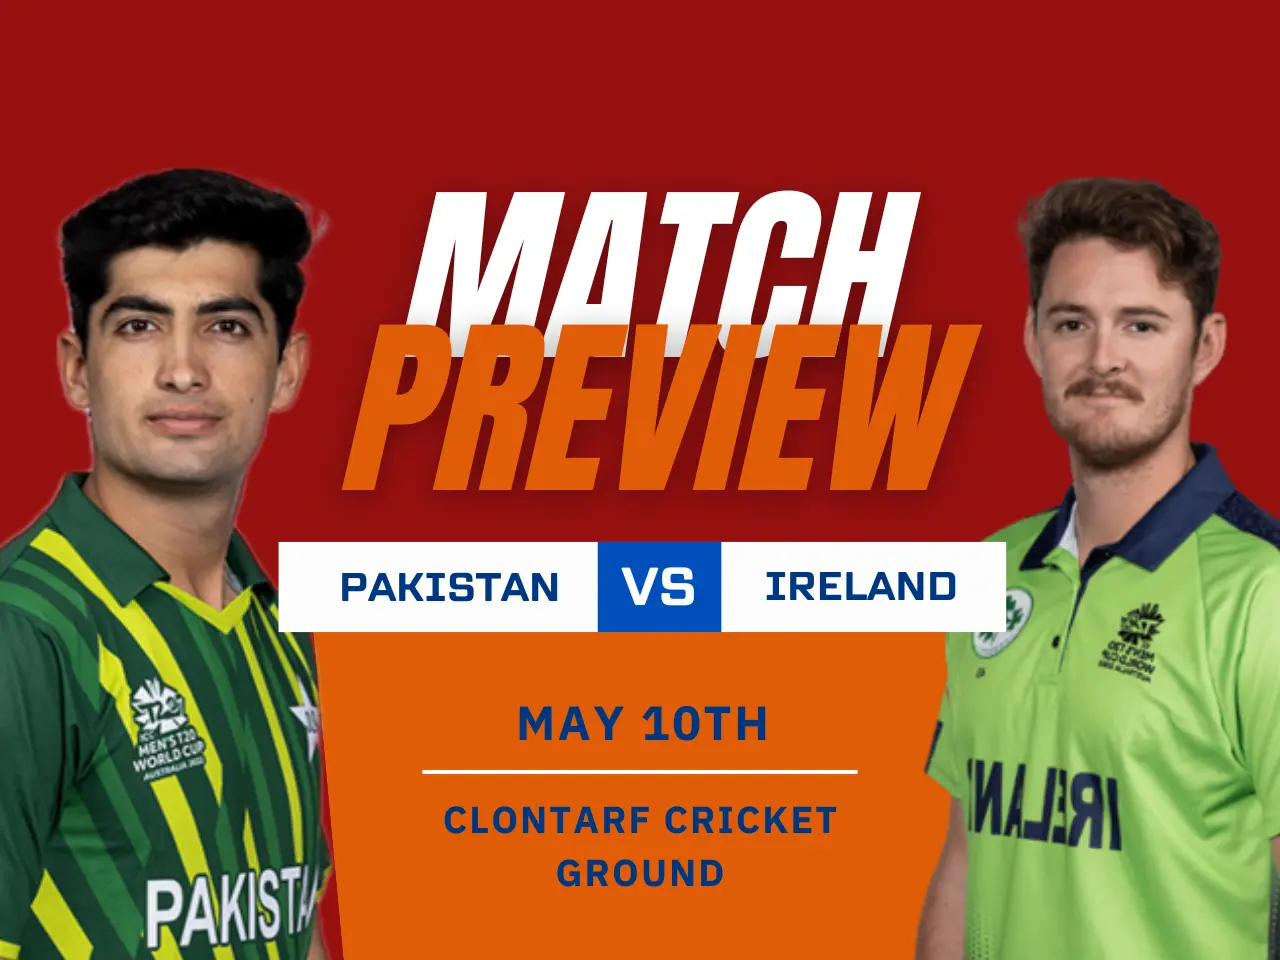 IRE vs PAK Preview for 1st T20I match